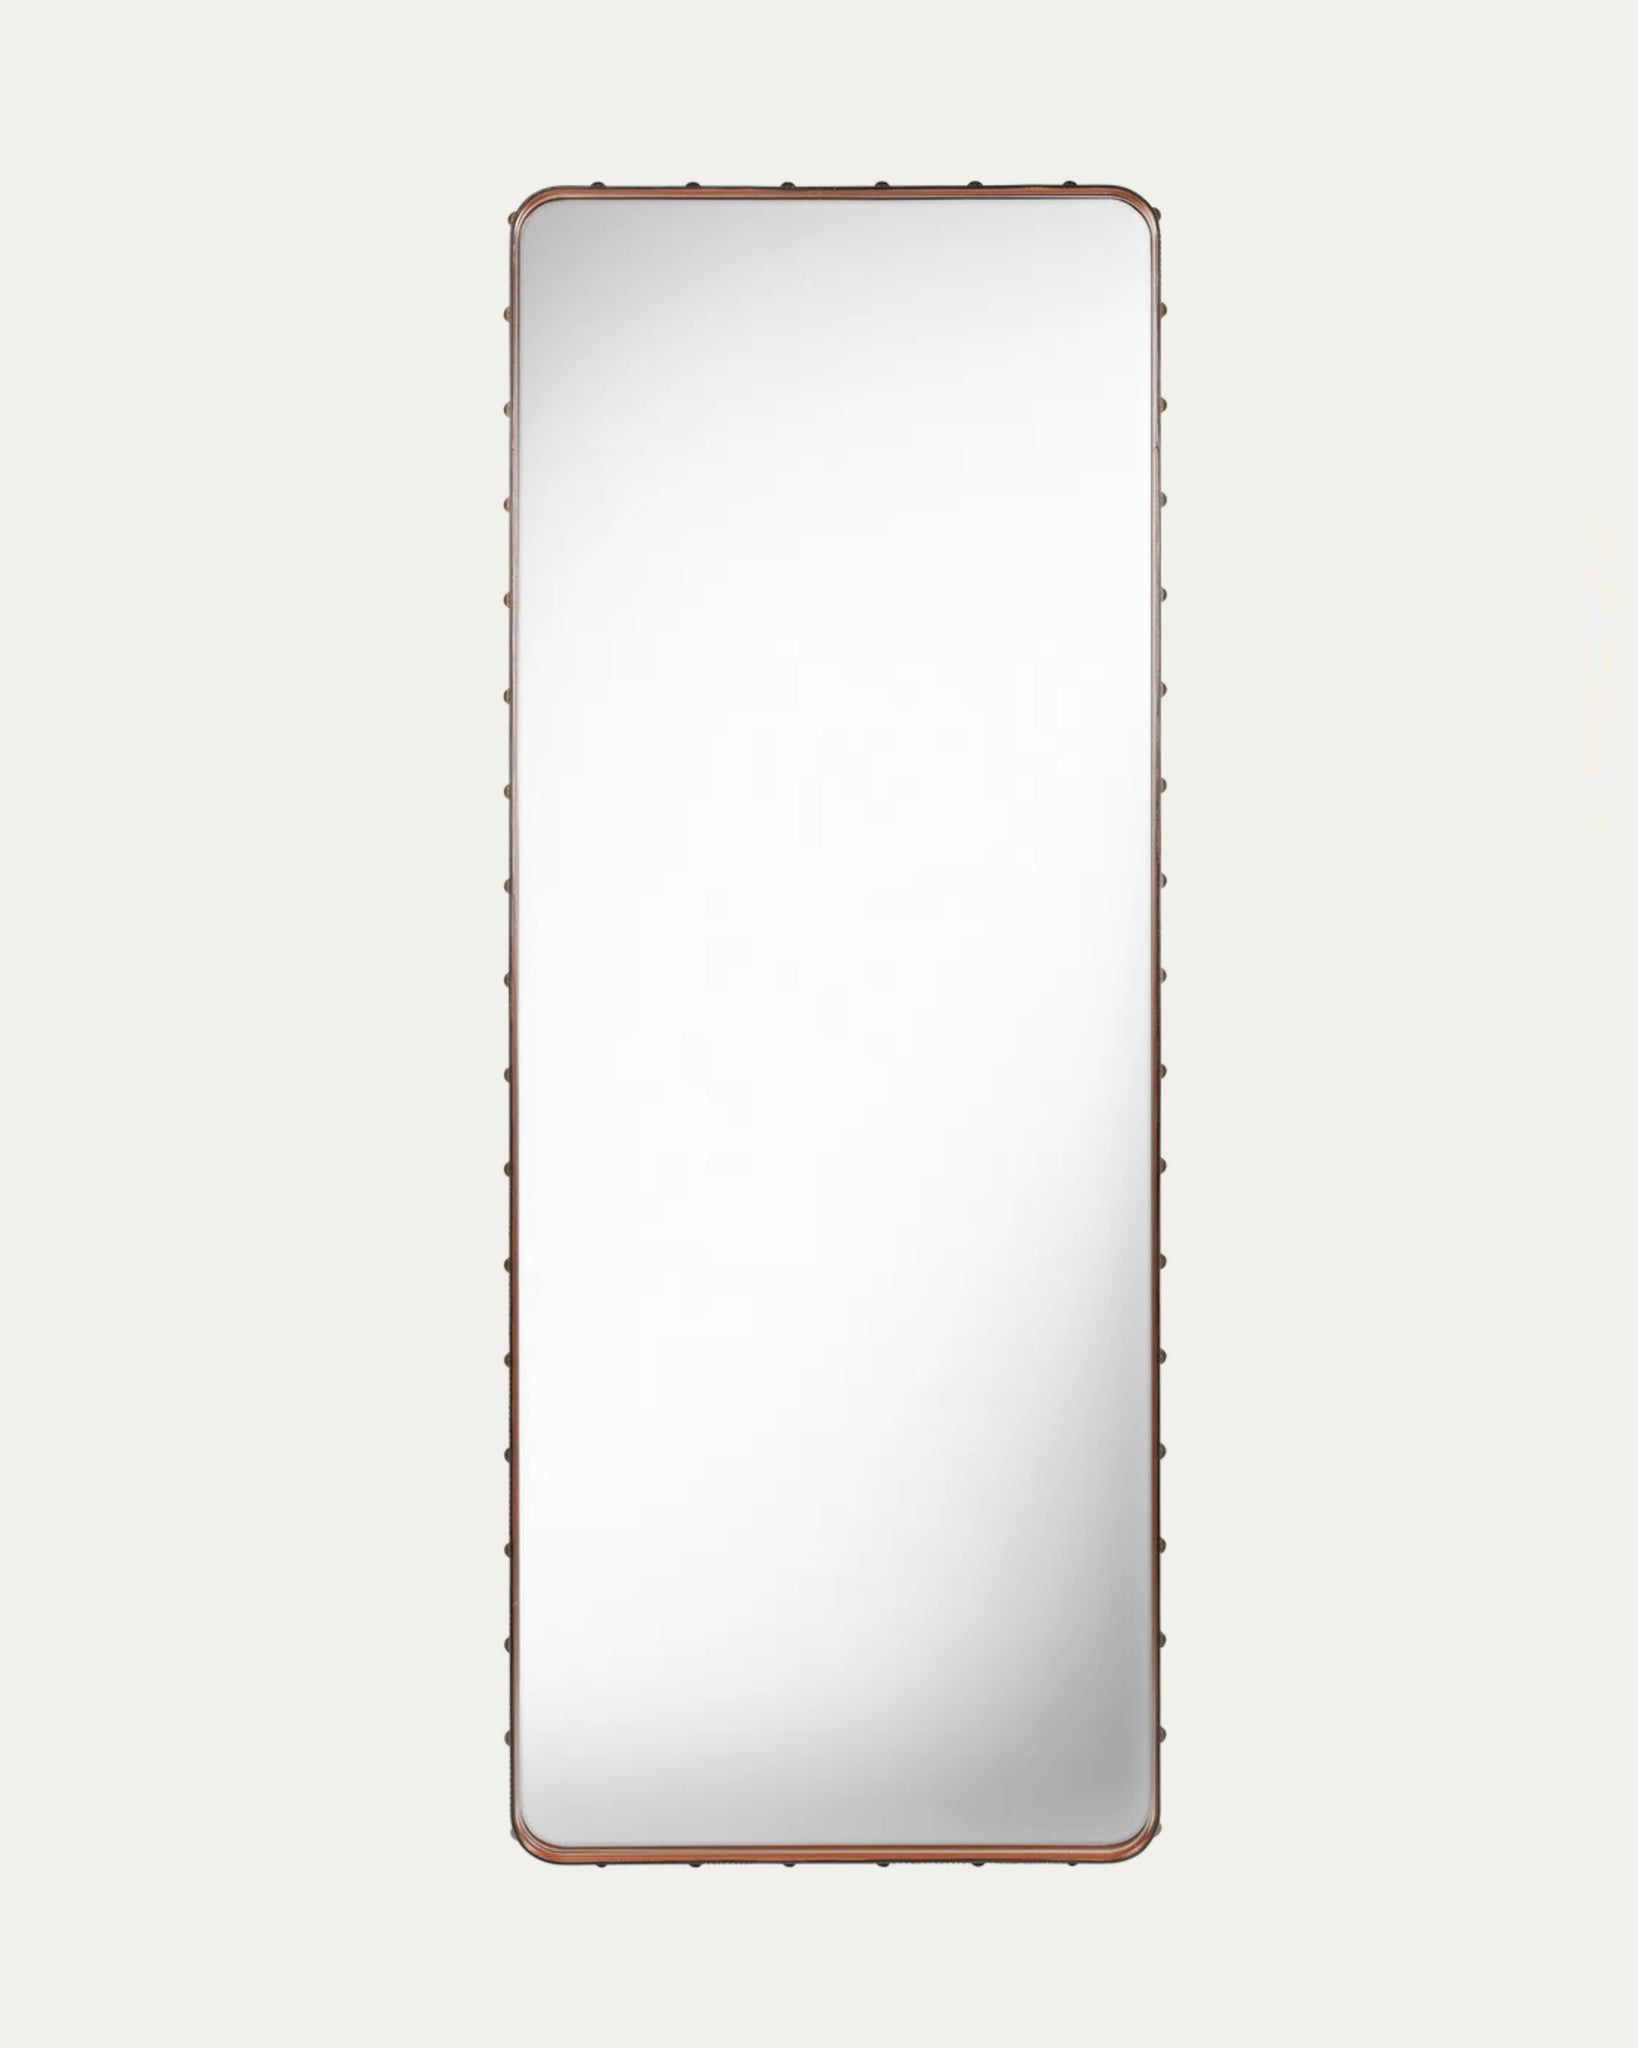 Adnet Wall Mirror, Rectangle | Tan Leather